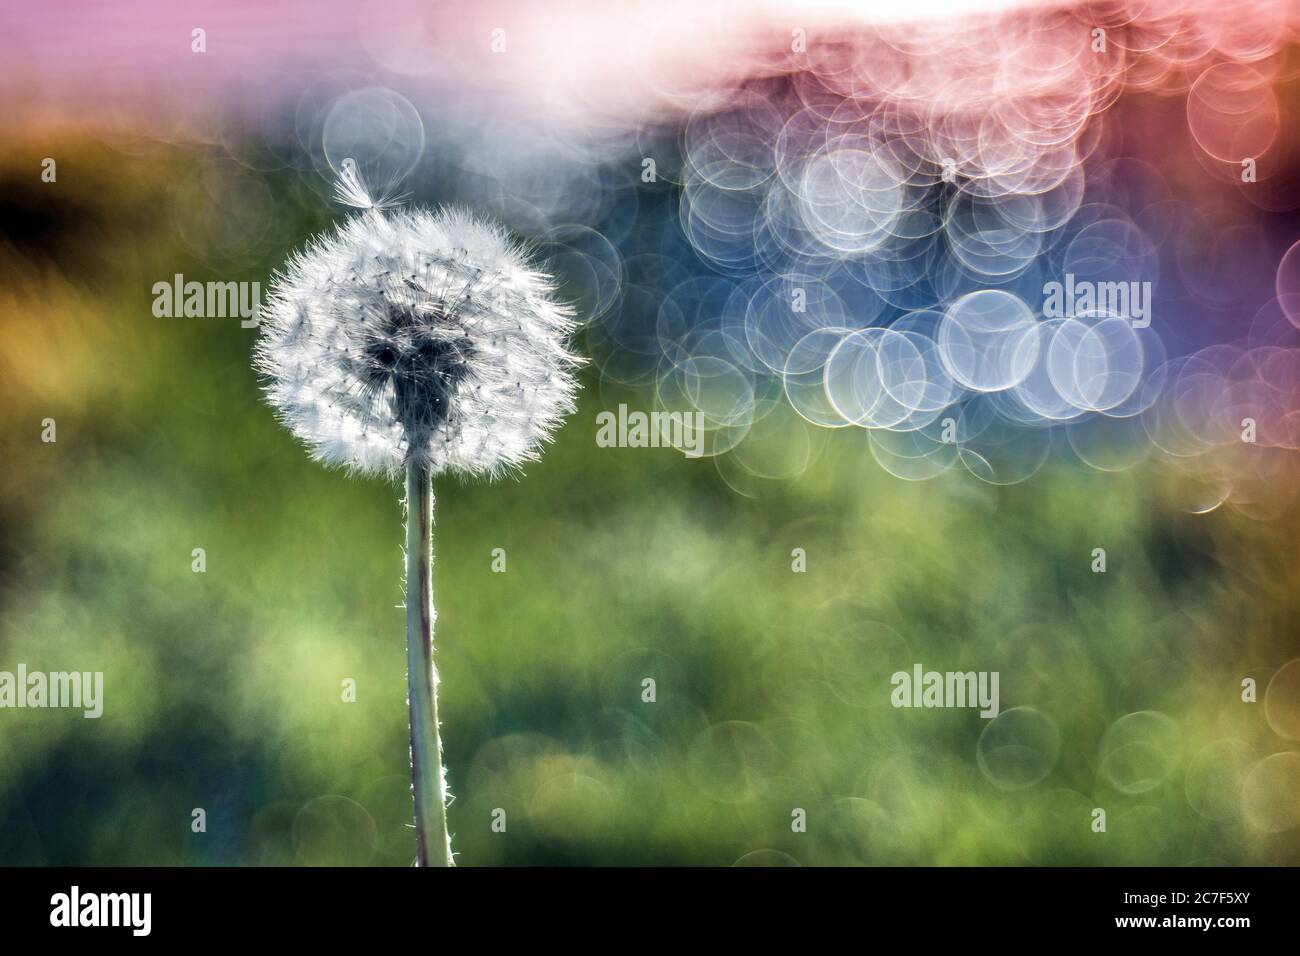 Closeup shot of a dandelion with a blurred background, great for background or a blog Stock Photo